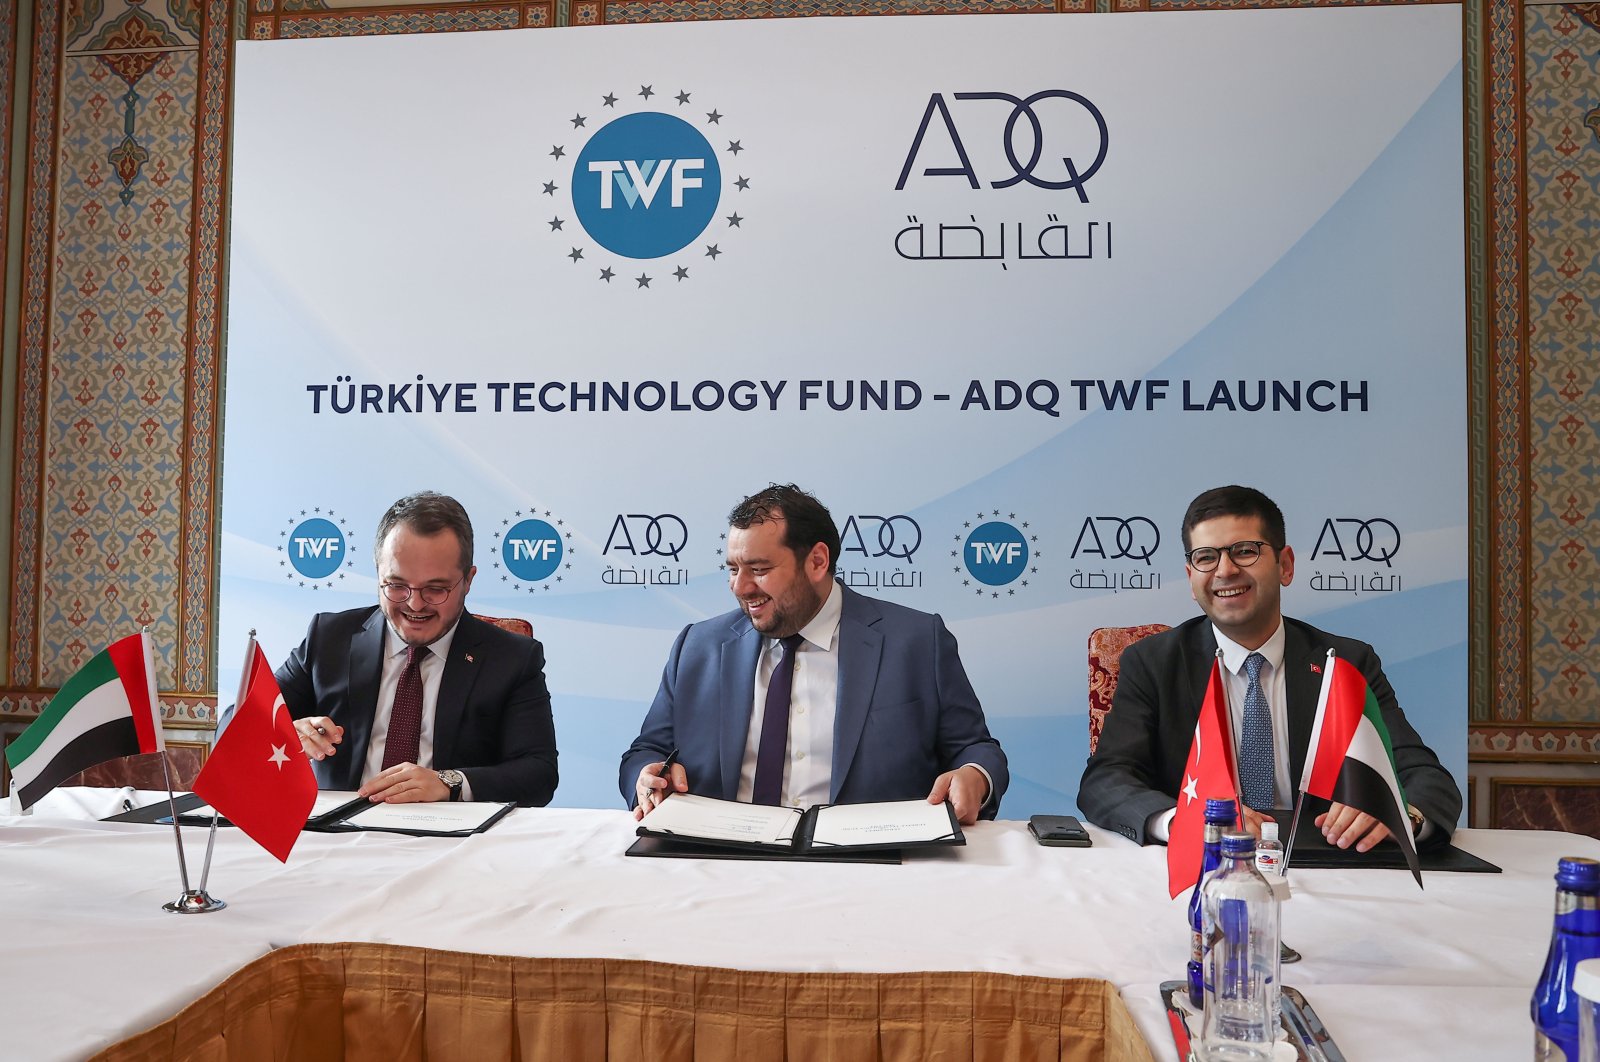 From left to right, TWF CEO Arda Ermut, ADQ CEO Mohamed Hassan Alsuwaidi and Turkey’s Investment Office head Ahmet Burak Dağlıoğlu during a launching ceremony of the Turkey Technology Fund – ADQ TWF in Istanbul, Turkey, March 23, 2022. (AA Photo)